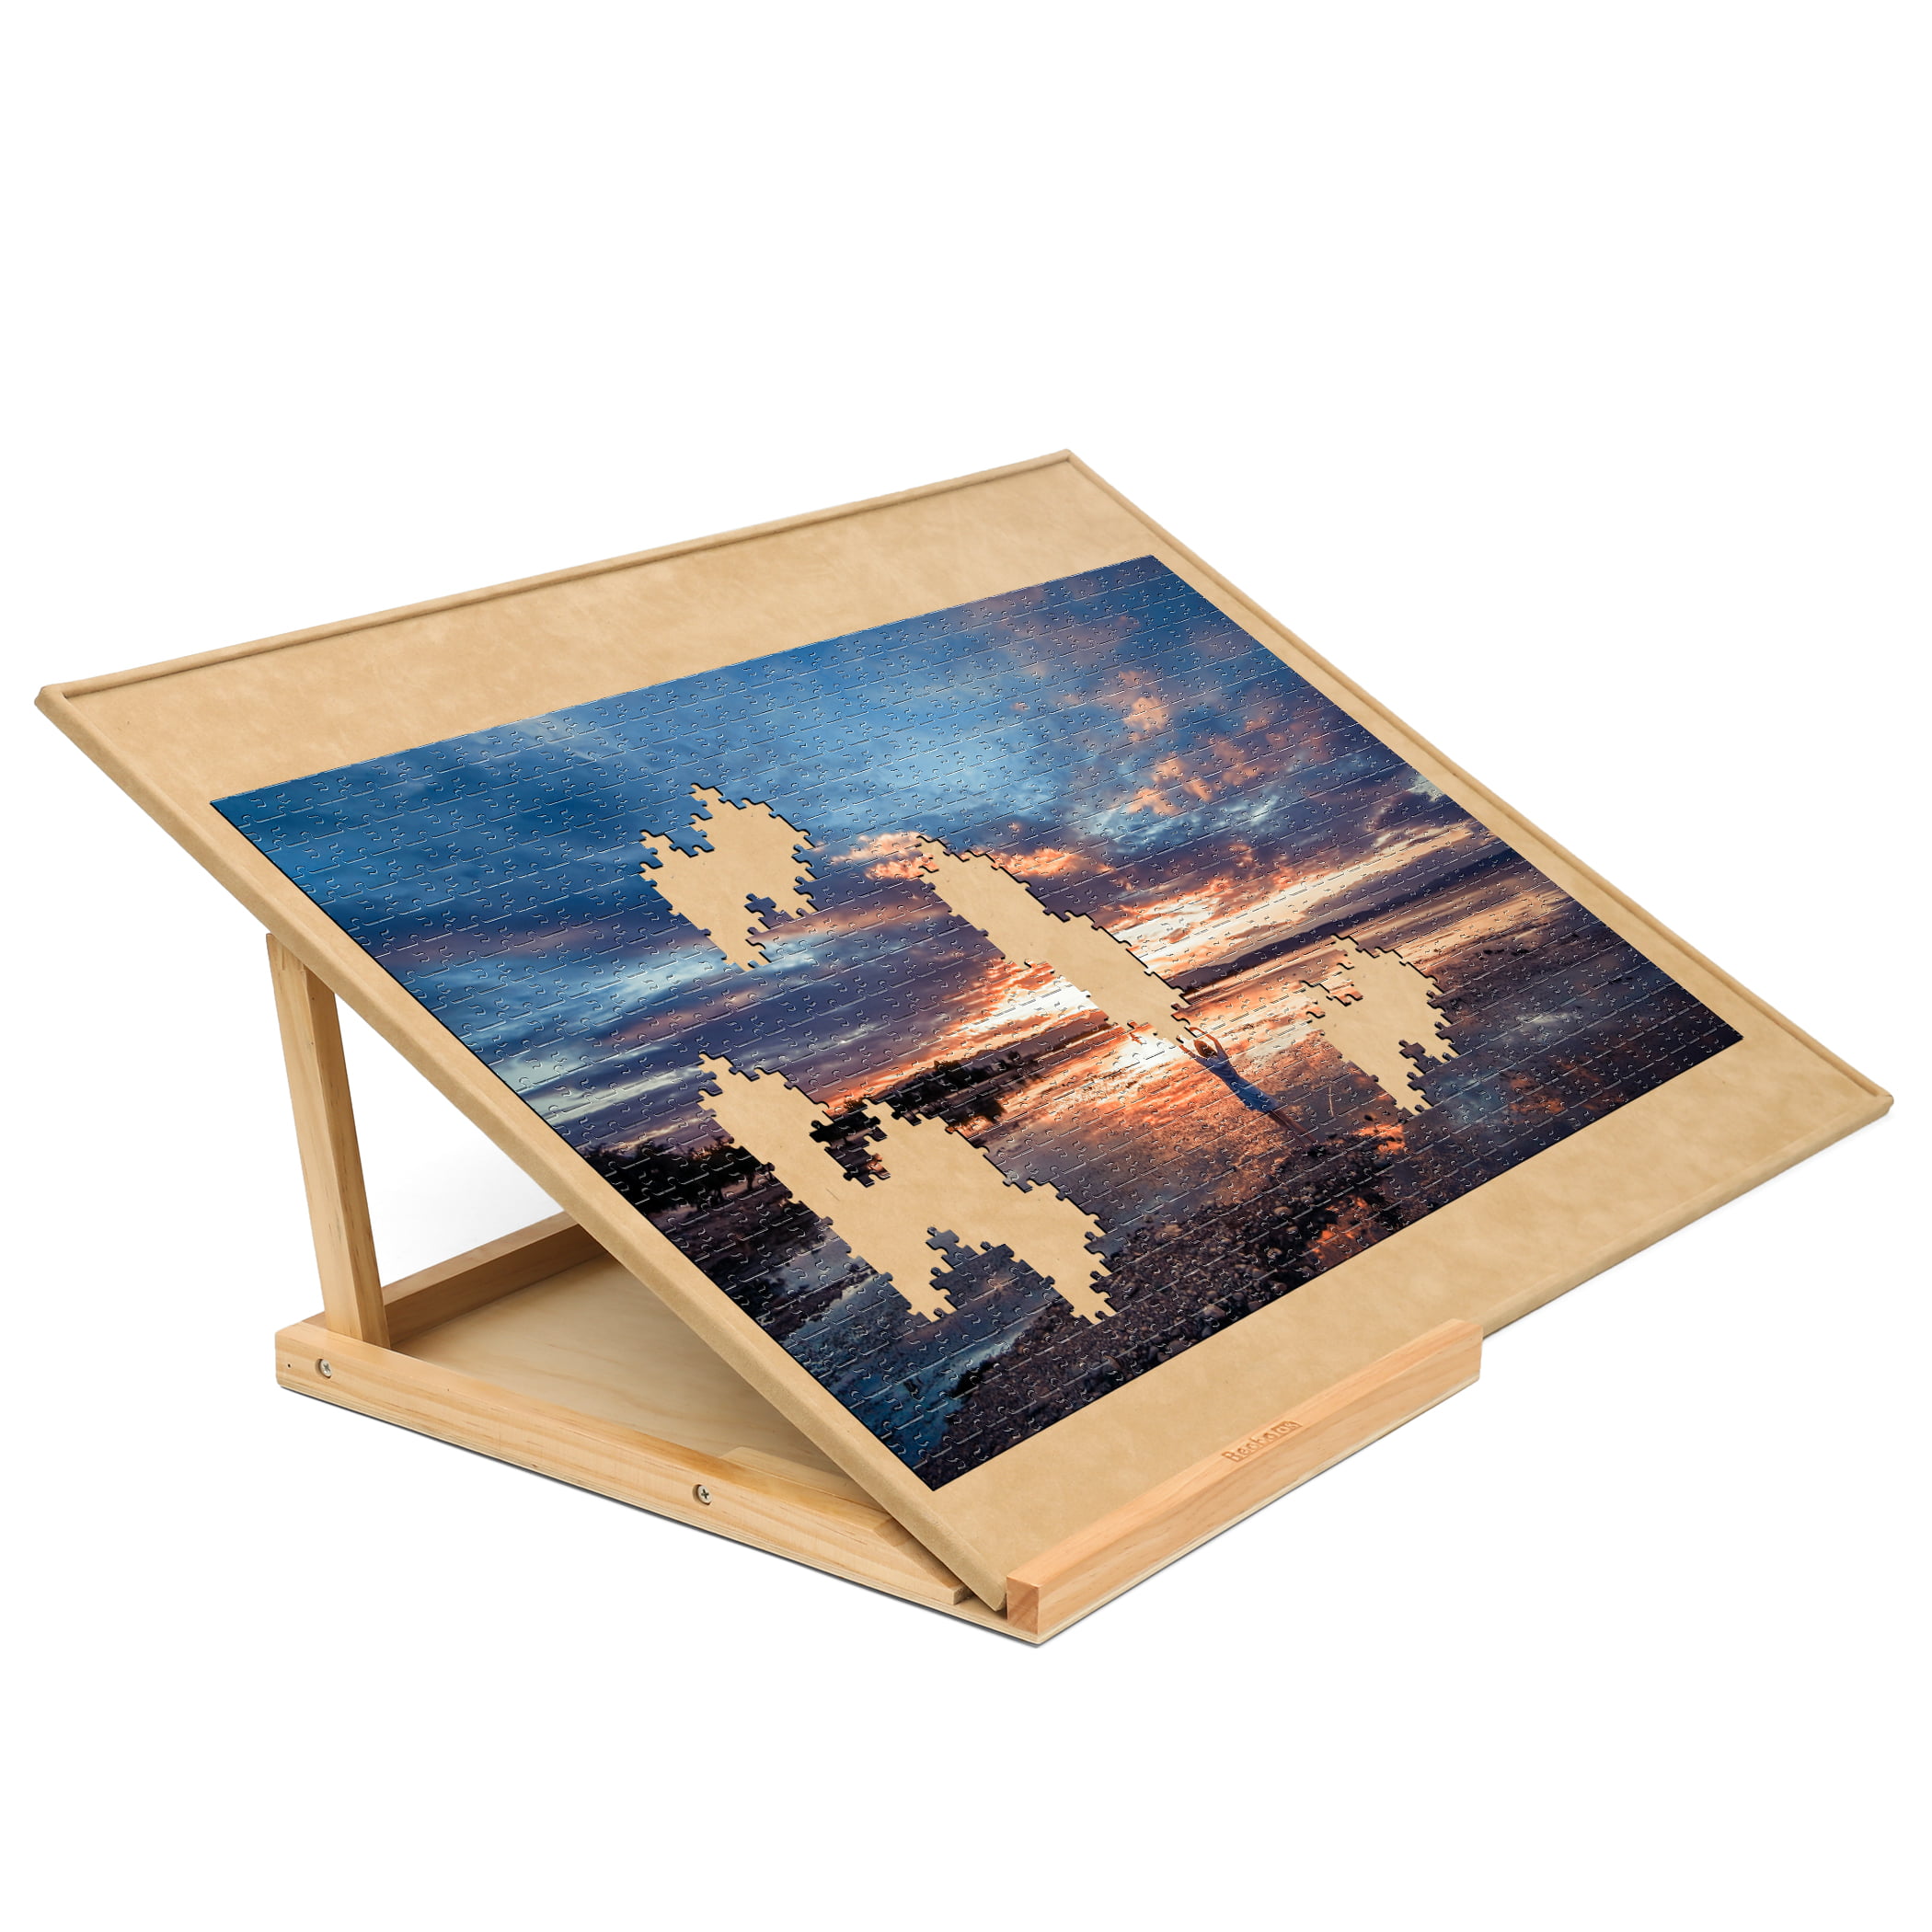 Puzzle Tables for Adults Jigsaw Puzzle Table Puzzle Tray Jumbo Size: 34×26 for Maximum 1500 Pieces Puzzles Puzzle Table Weight: 2.0 LBS-5 KGS Puzzle Board Puzzle Boards and Storage 